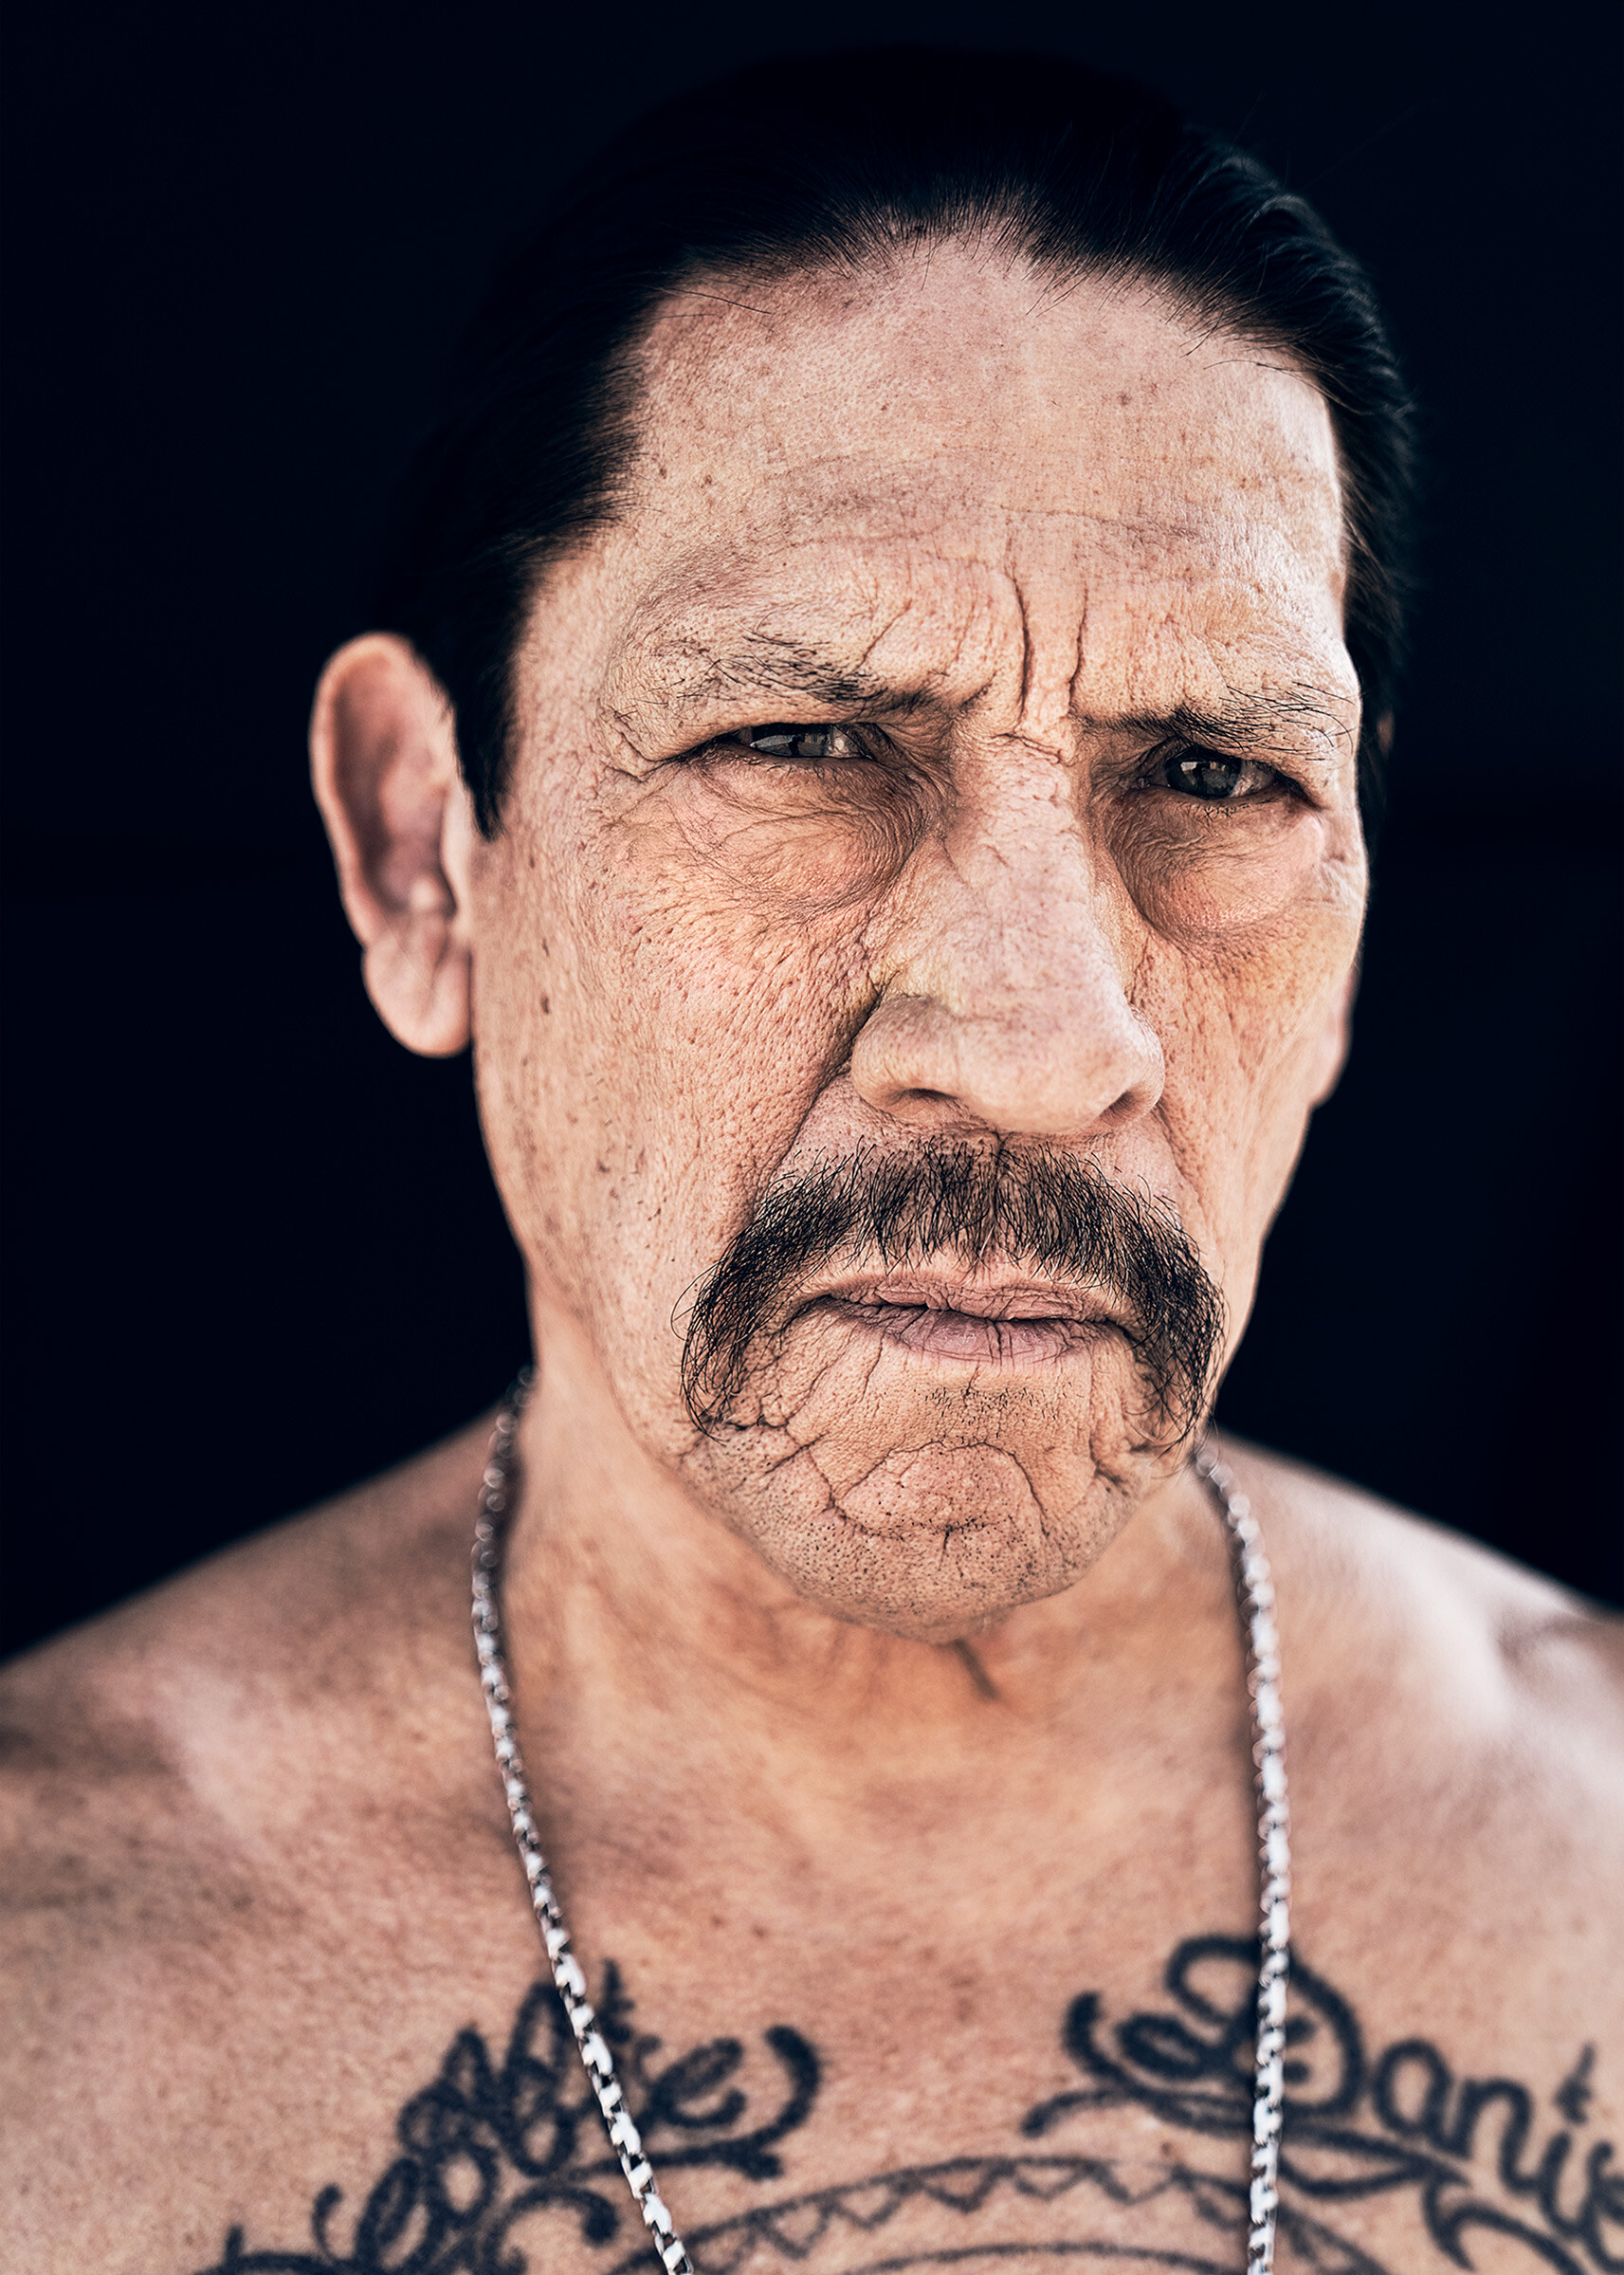 Danny Trejo: A real-life character, Long hair, Trademark mustache, The striking tattoo on his chest, An icon of rudeness. 1720x2400 HD Wallpaper.